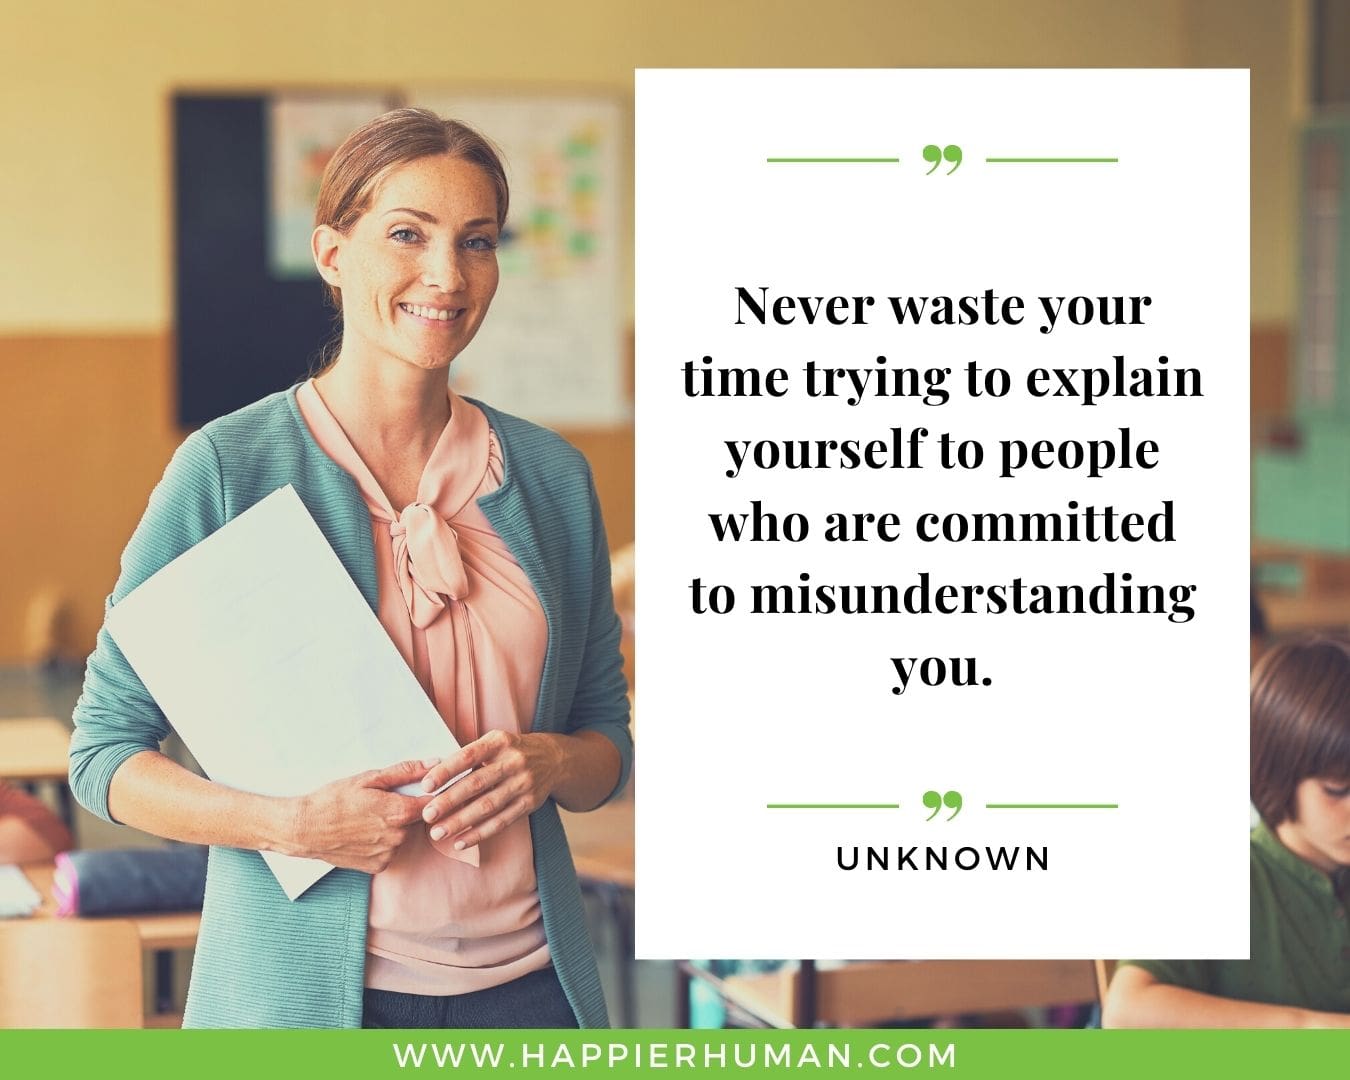 Haters Quotes - “Never waste your time trying to explain yourself to people who are committed to misunderstanding you.” - Unknown